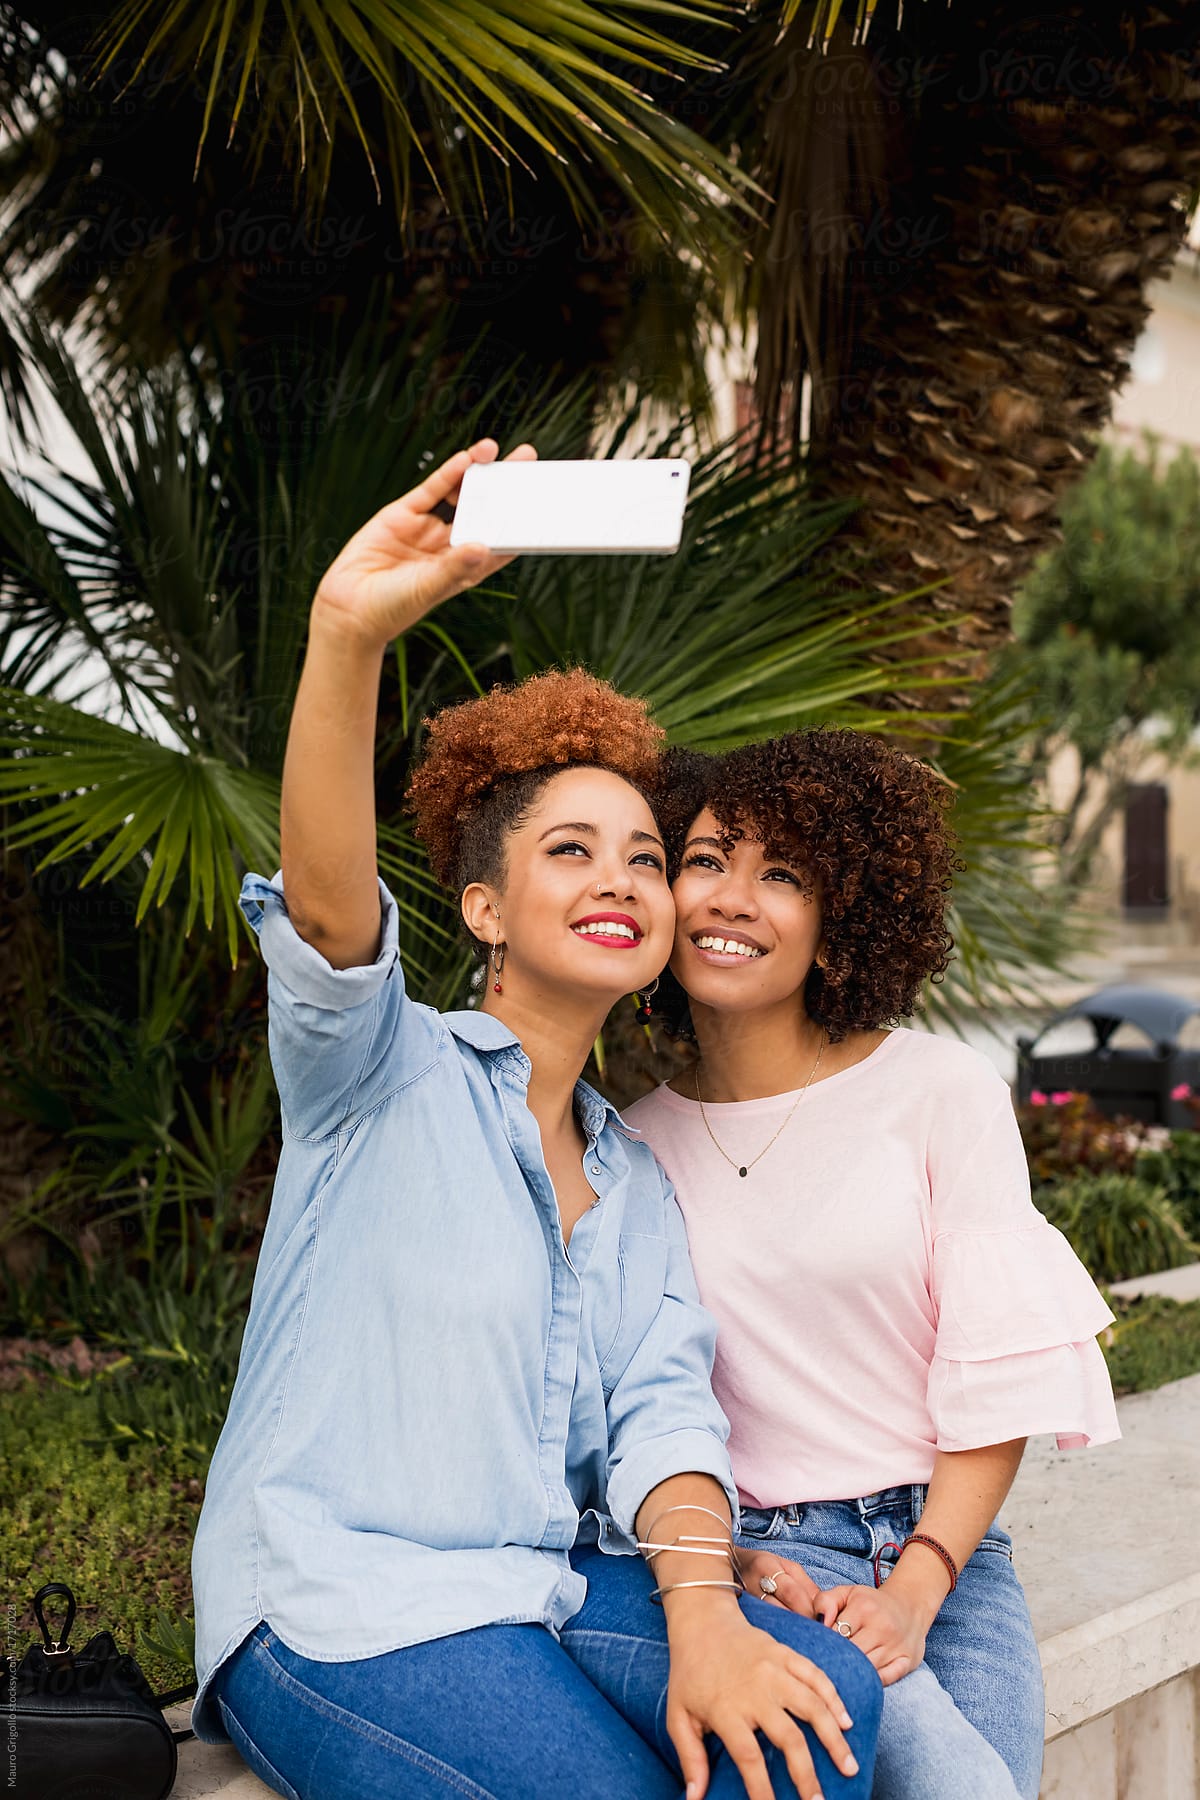 Women using a mobile phone for a selfie